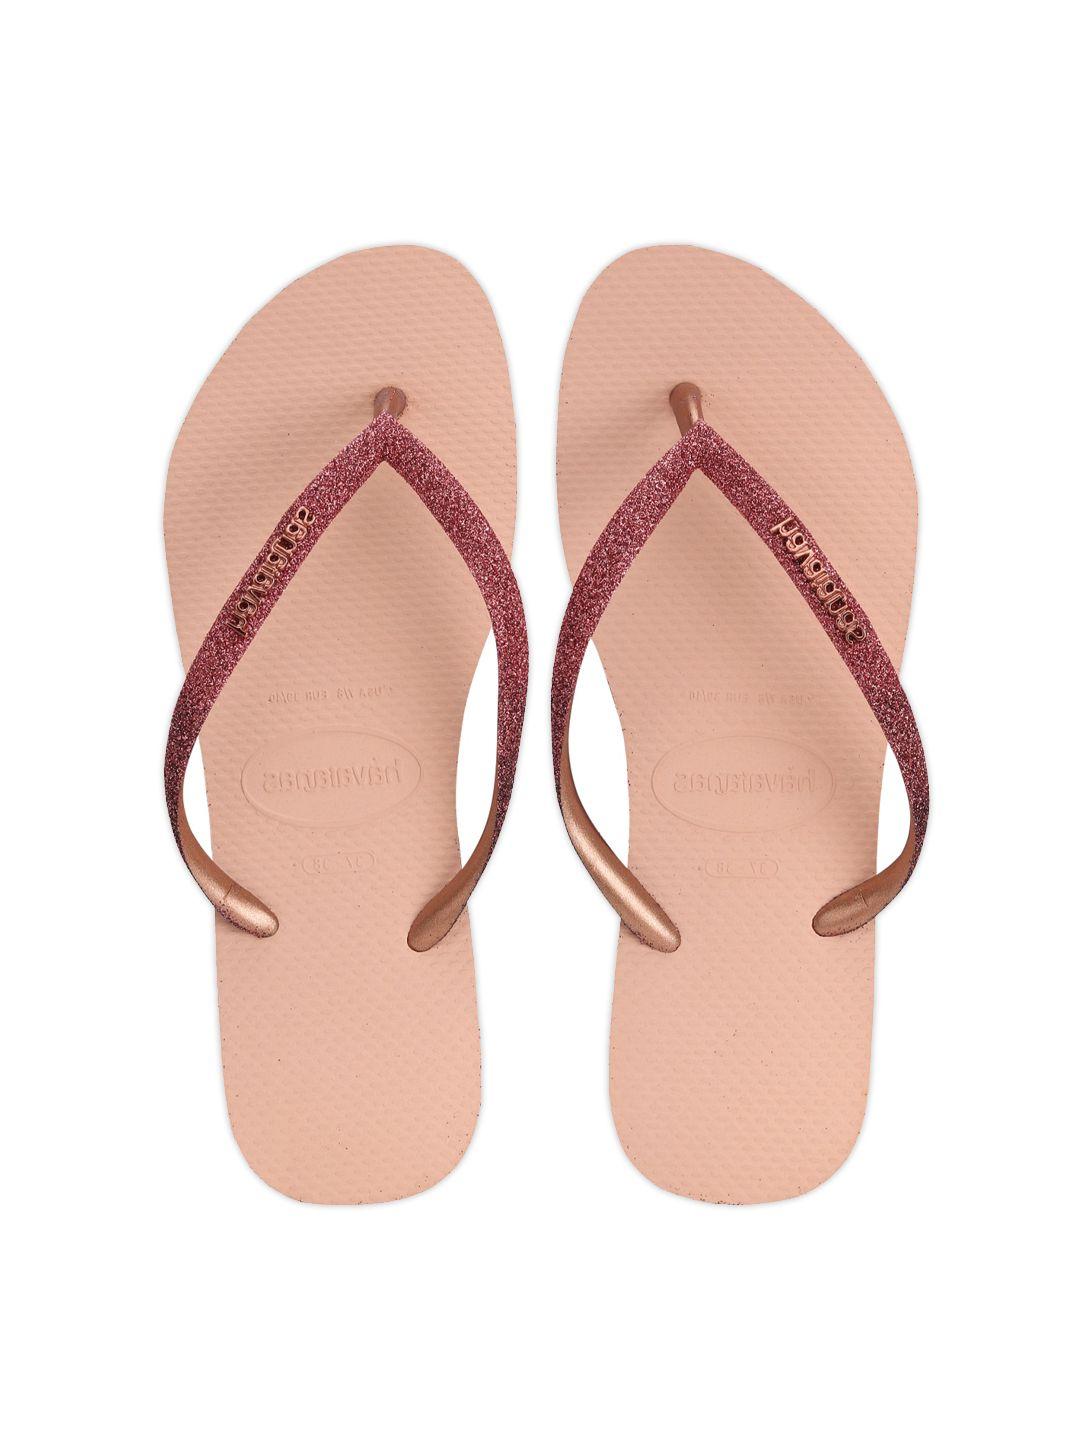 havaianas women rose gold rubber slim sparkle ii room slippers